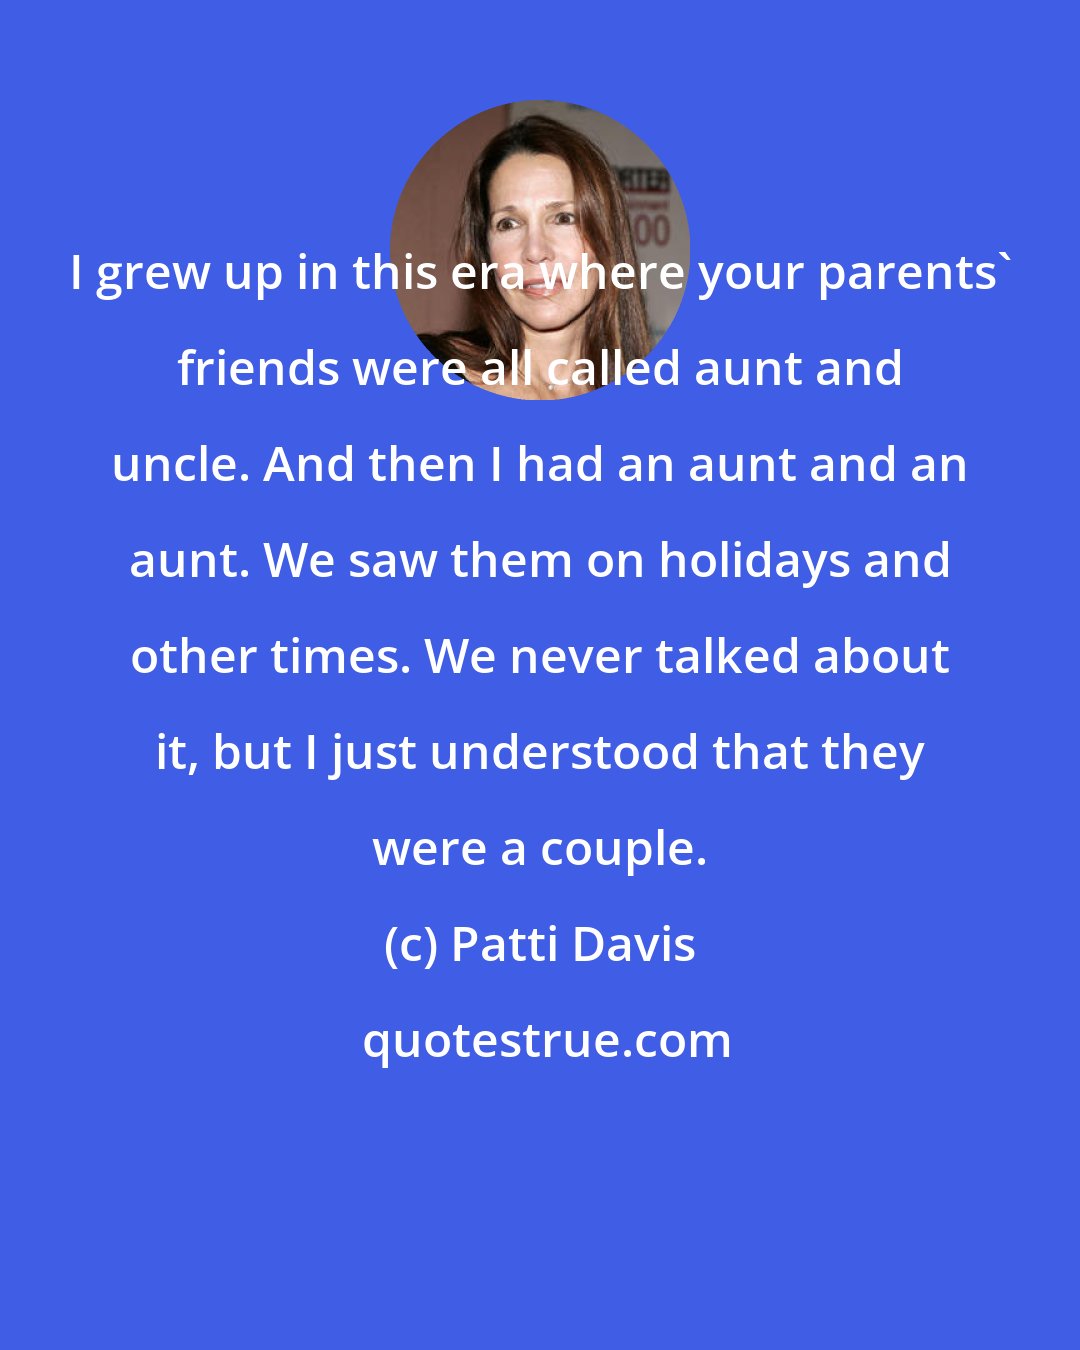 Patti Davis: I grew up in this era where your parents' friends were all called aunt and uncle. And then I had an aunt and an aunt. We saw them on holidays and other times. We never talked about it, but I just understood that they were a couple.